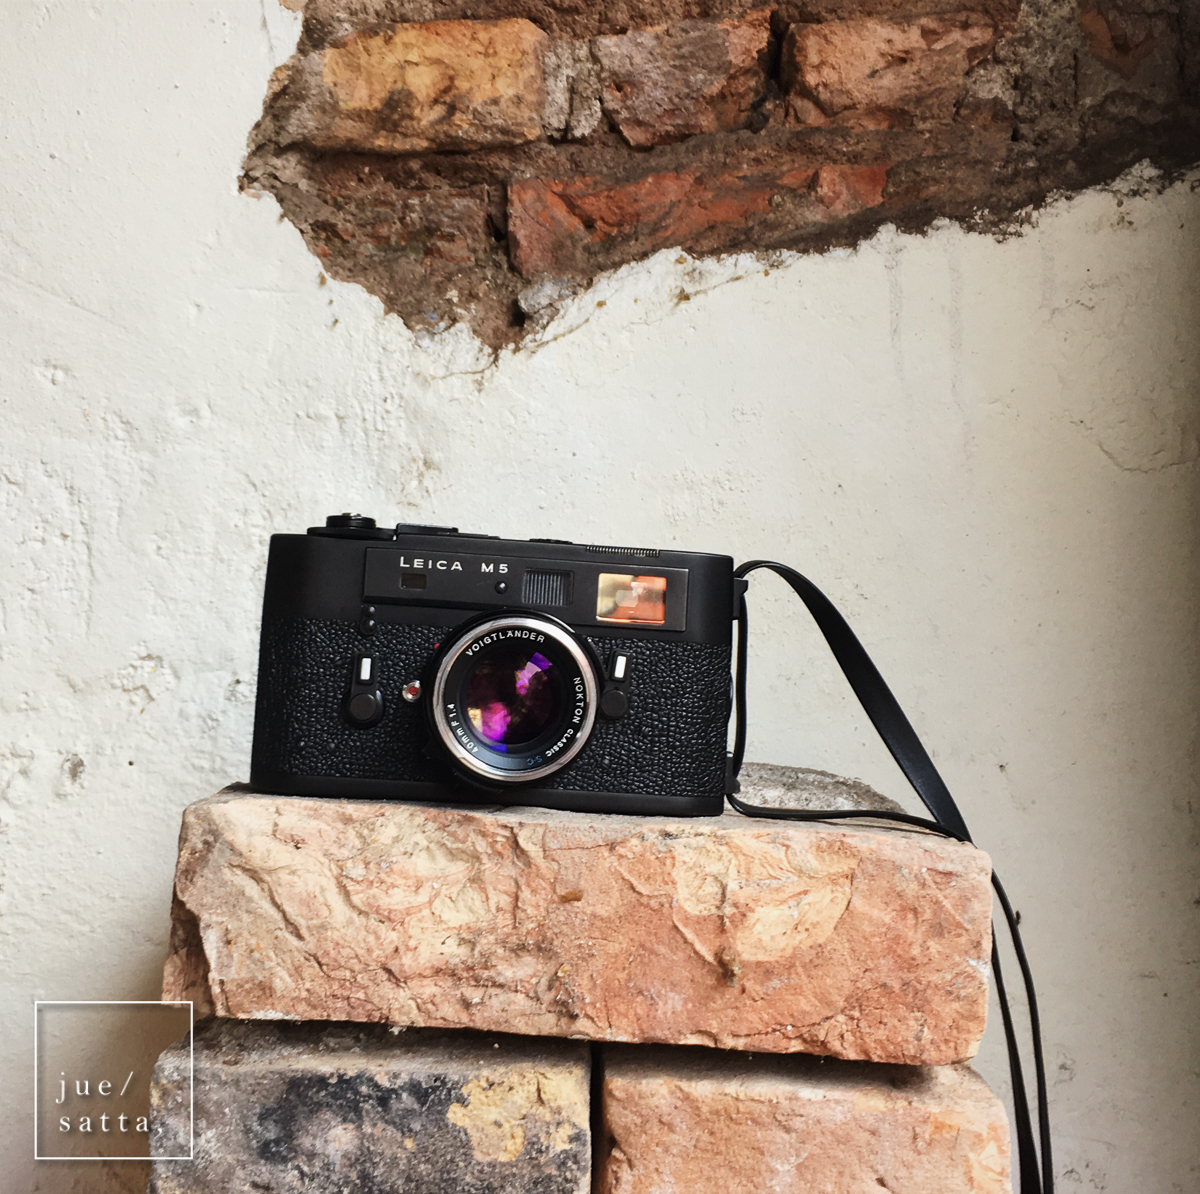 Leica M5 film camera of Tatsuya, a Japanese photographer we met at the Coffee Jar (iPhonegraphy)